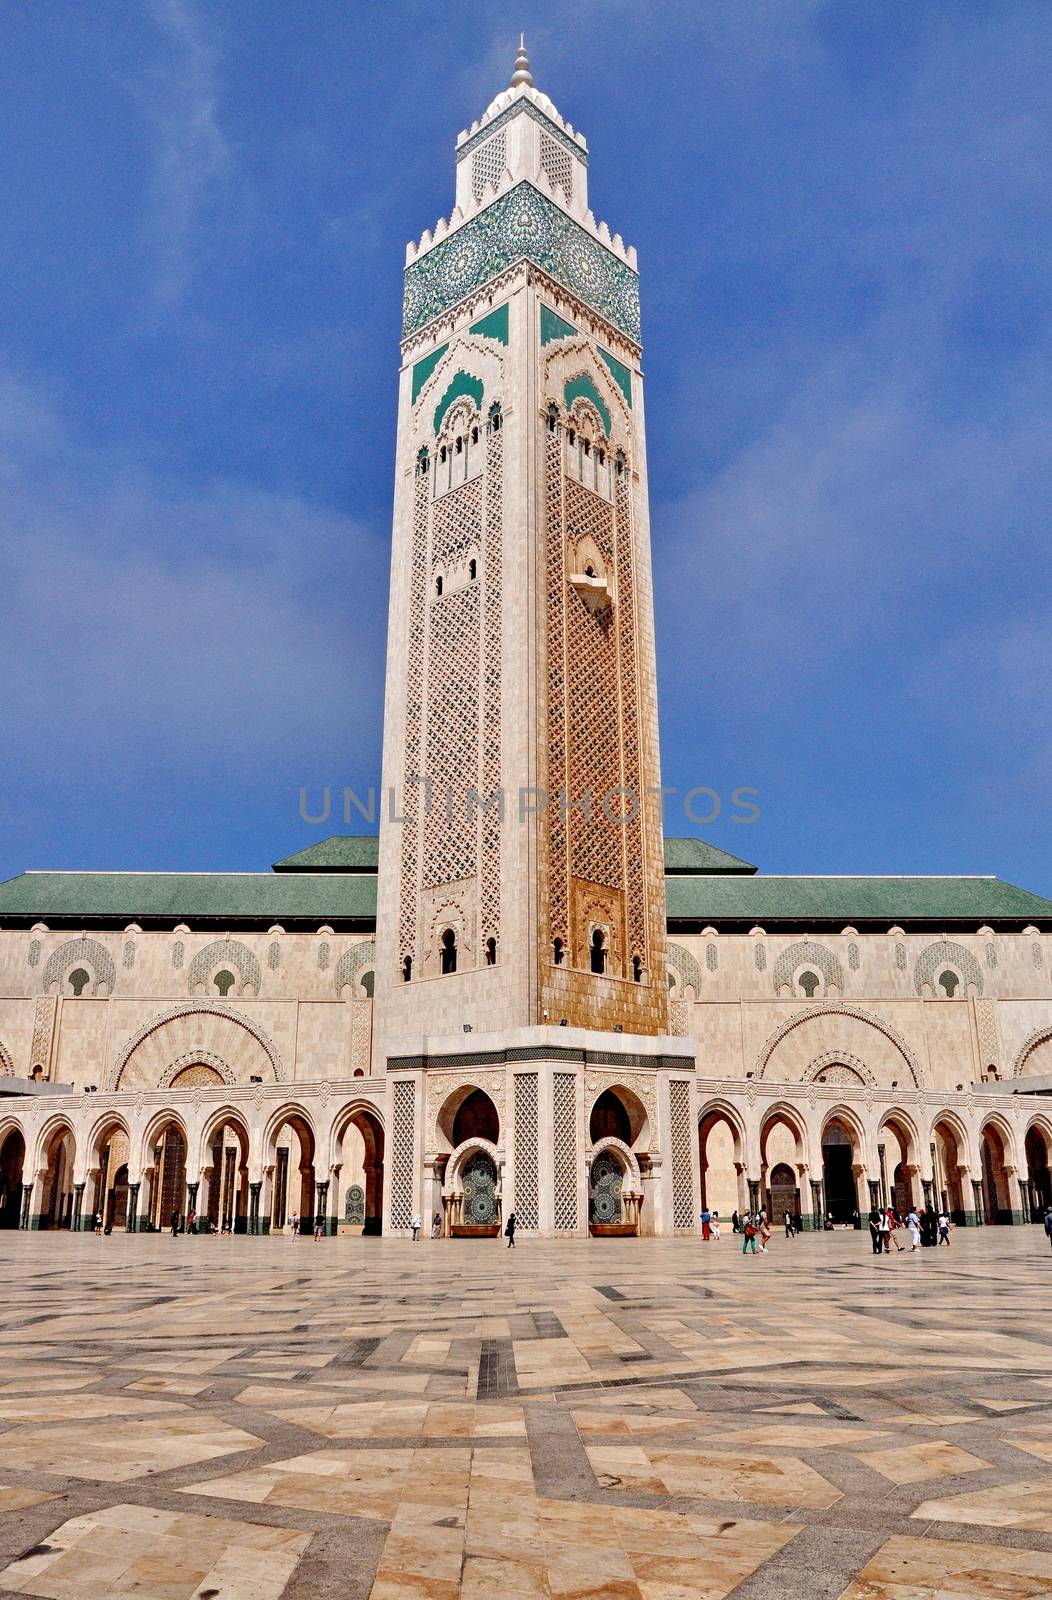 The Hassan II Mosque, located in Casablanca is the largest mosque in Morocco and the third largest mosque in the world